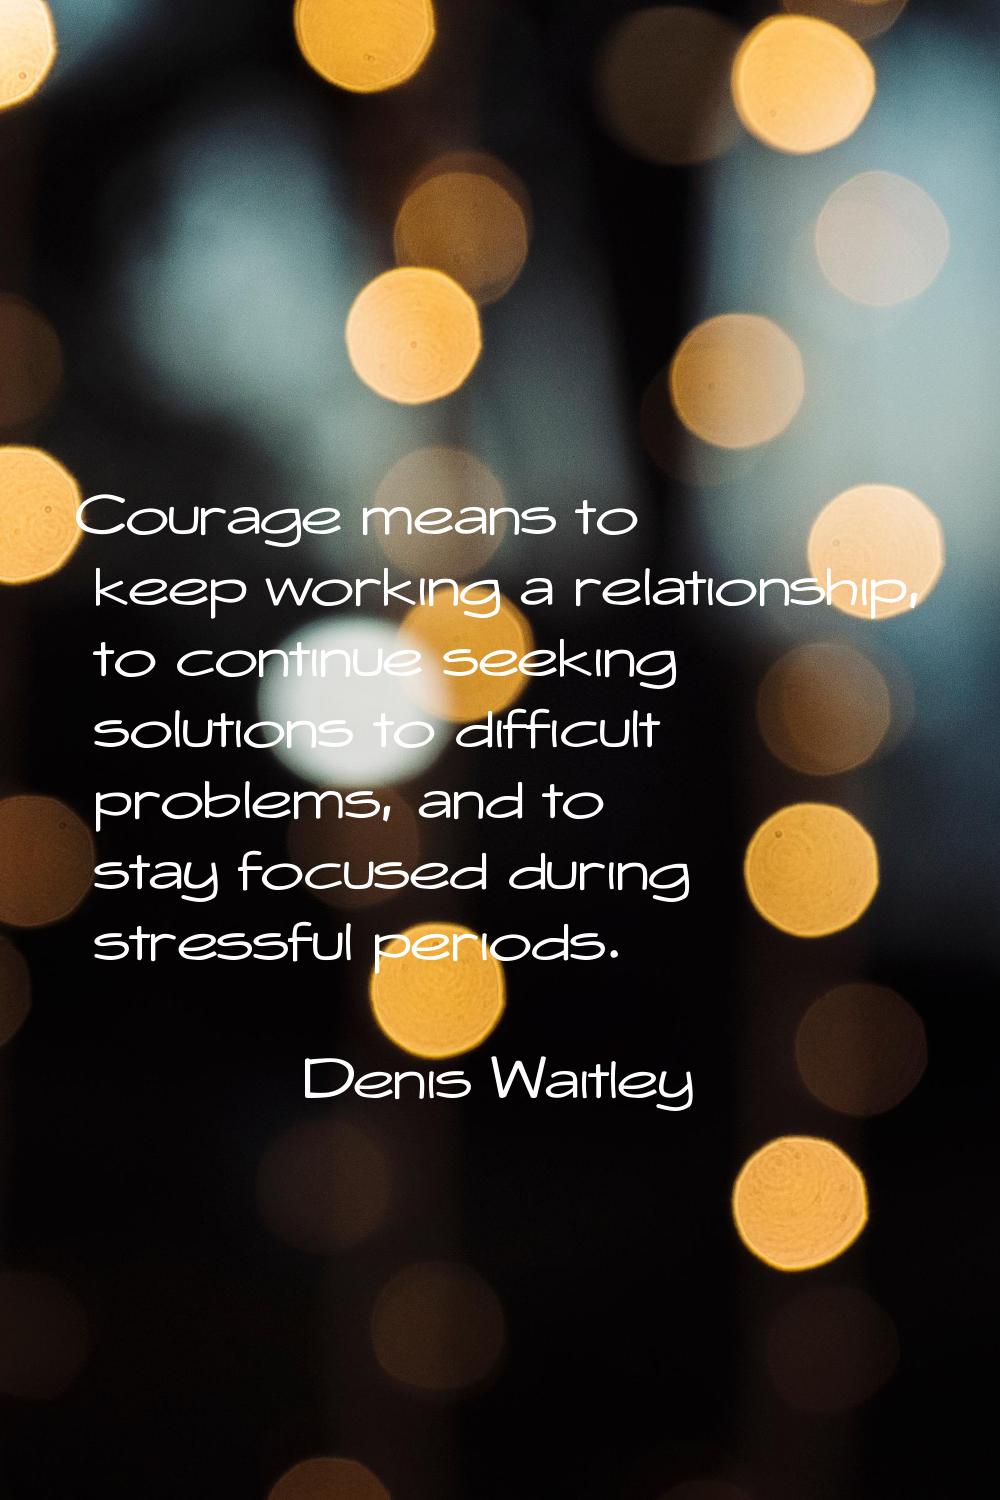 Courage means to keep working a relationship, to continue seeking solutions to difficult problems, 